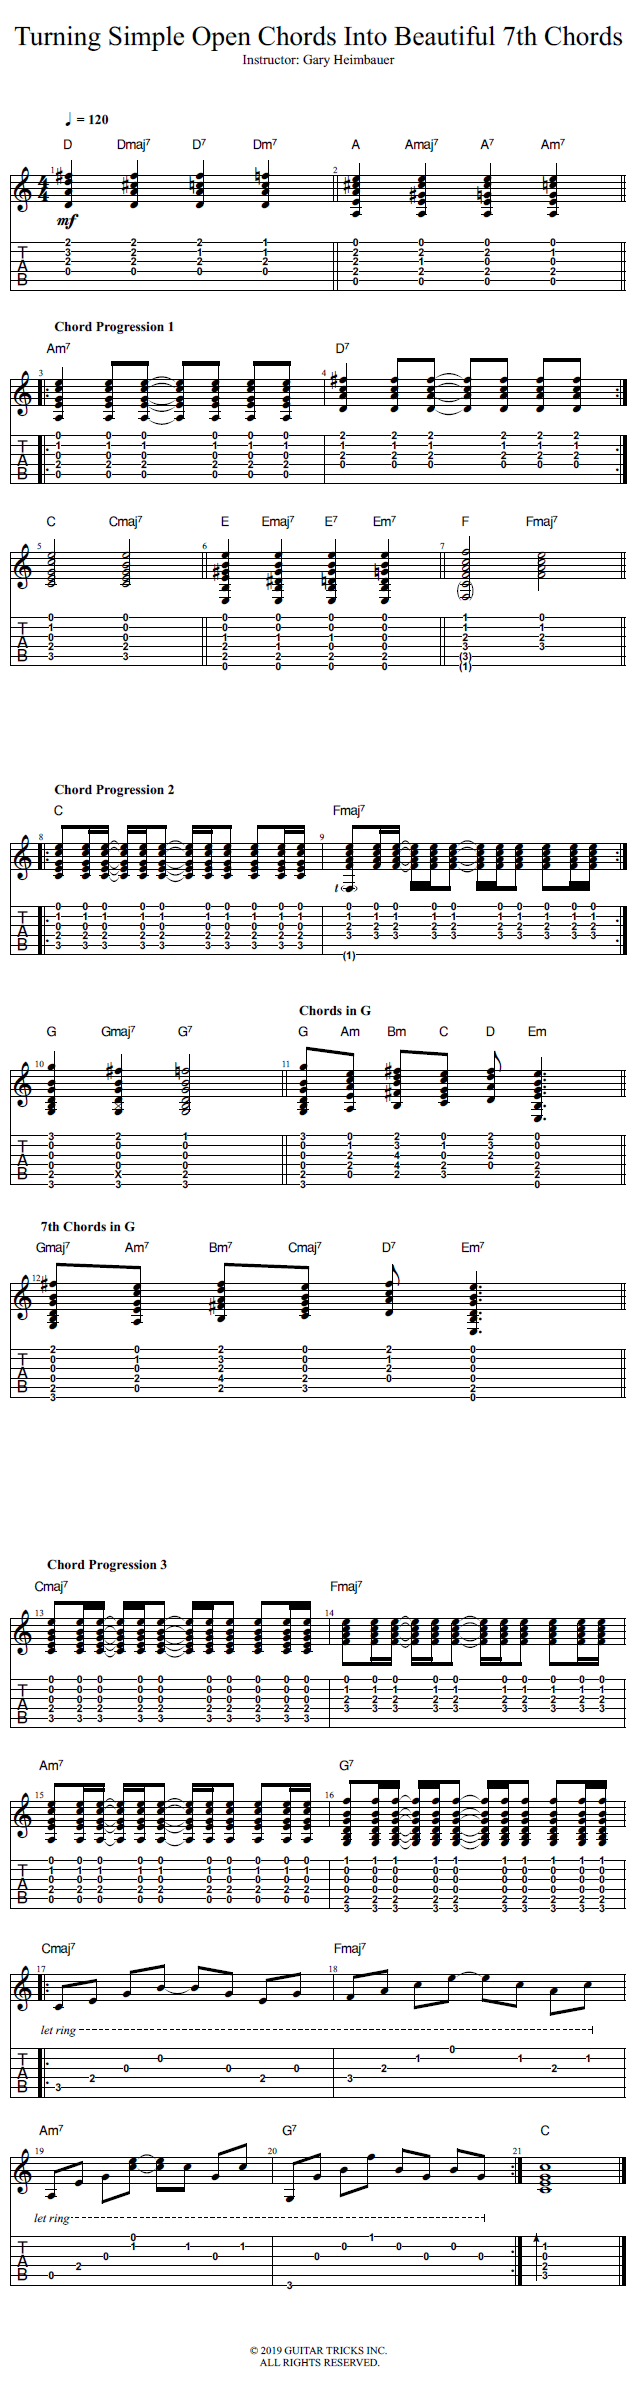 Turning Simple Open Chords Into Beautiful 7th Chords song notation